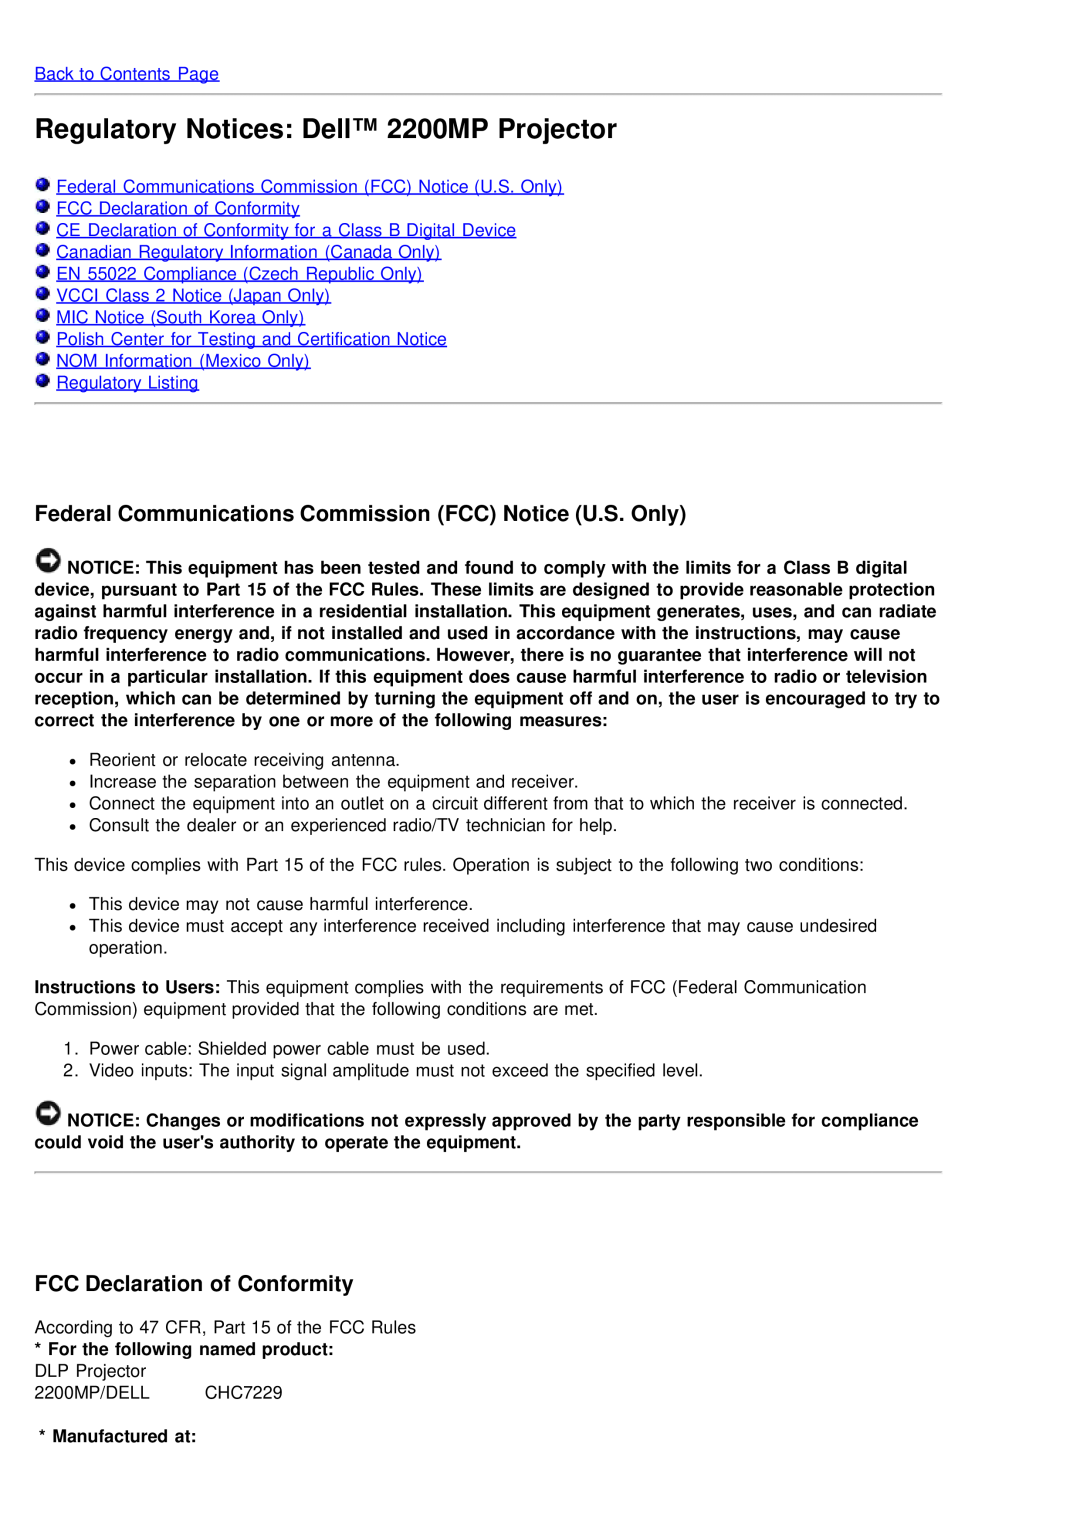 Dell Regulatory Notices Dell 2200MP Projector, Federal Communications Commission FCC Notice U.S. Only, Manufactured at 